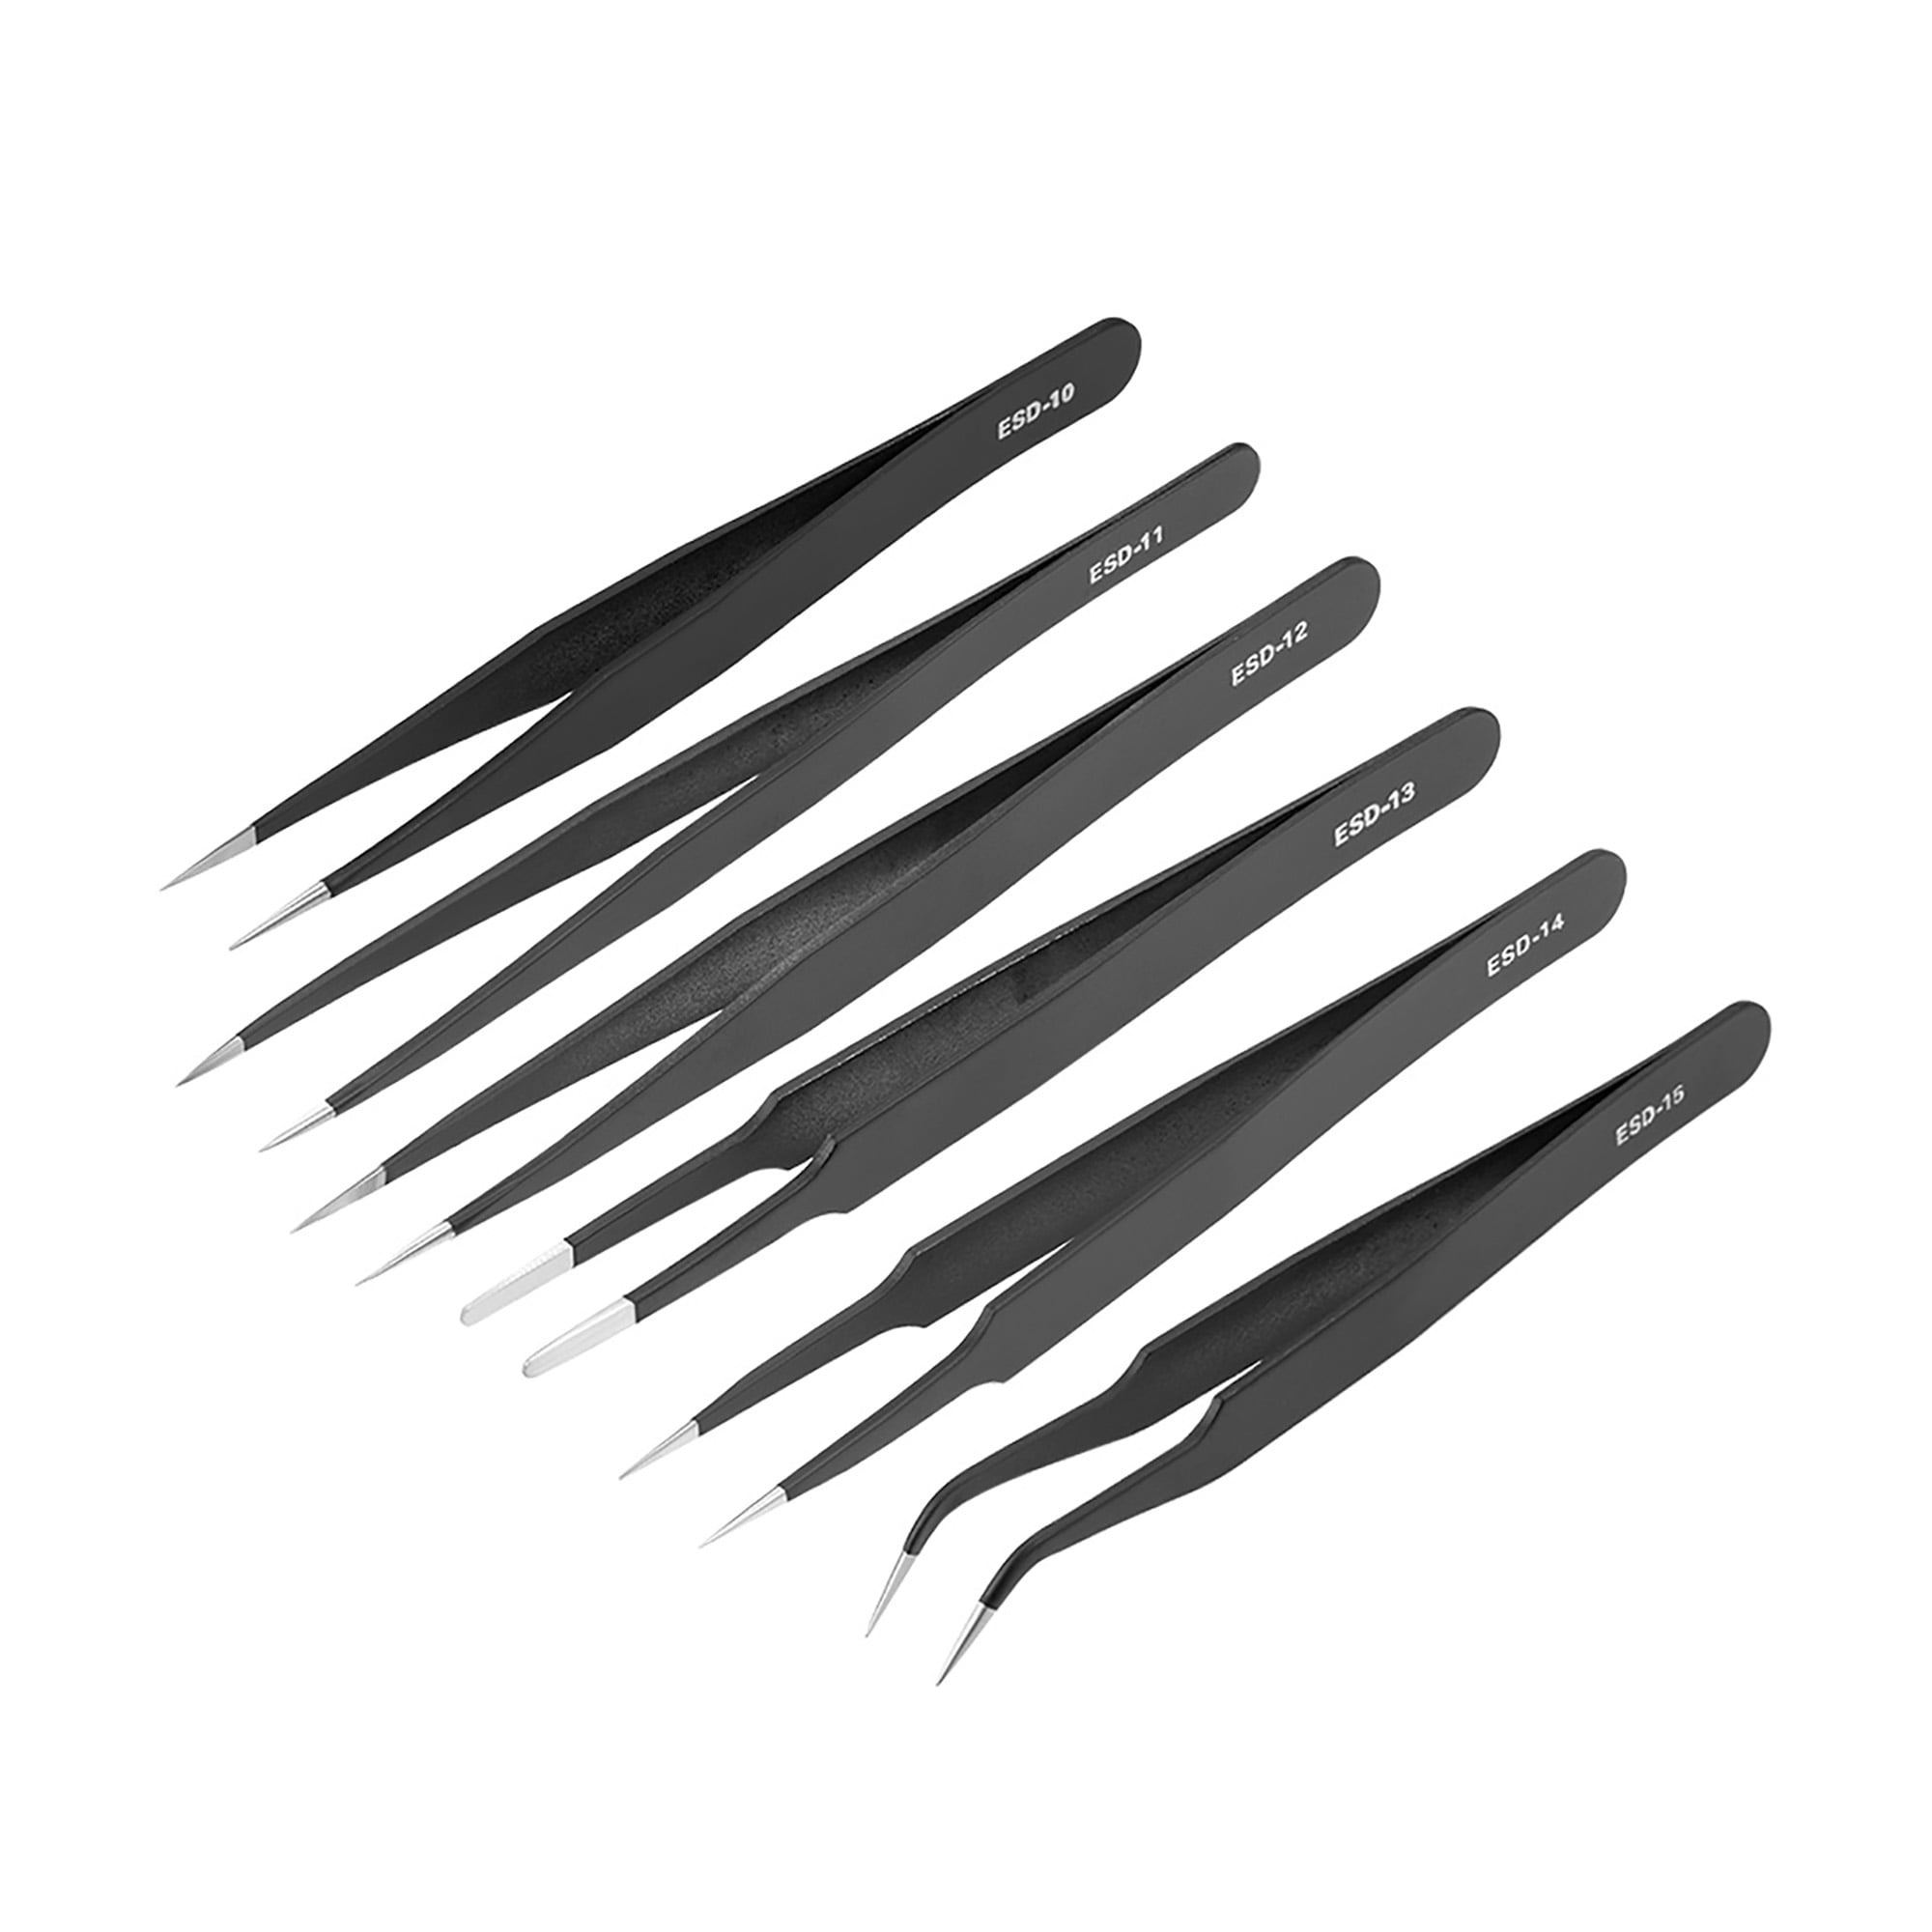 Tweezers, 5Pcs Precision Tweezers Set - Anti - Static Stainless Steel  Tweezers for Electronics, Jewelry Making, Medical and Laboratory Work,  Craft